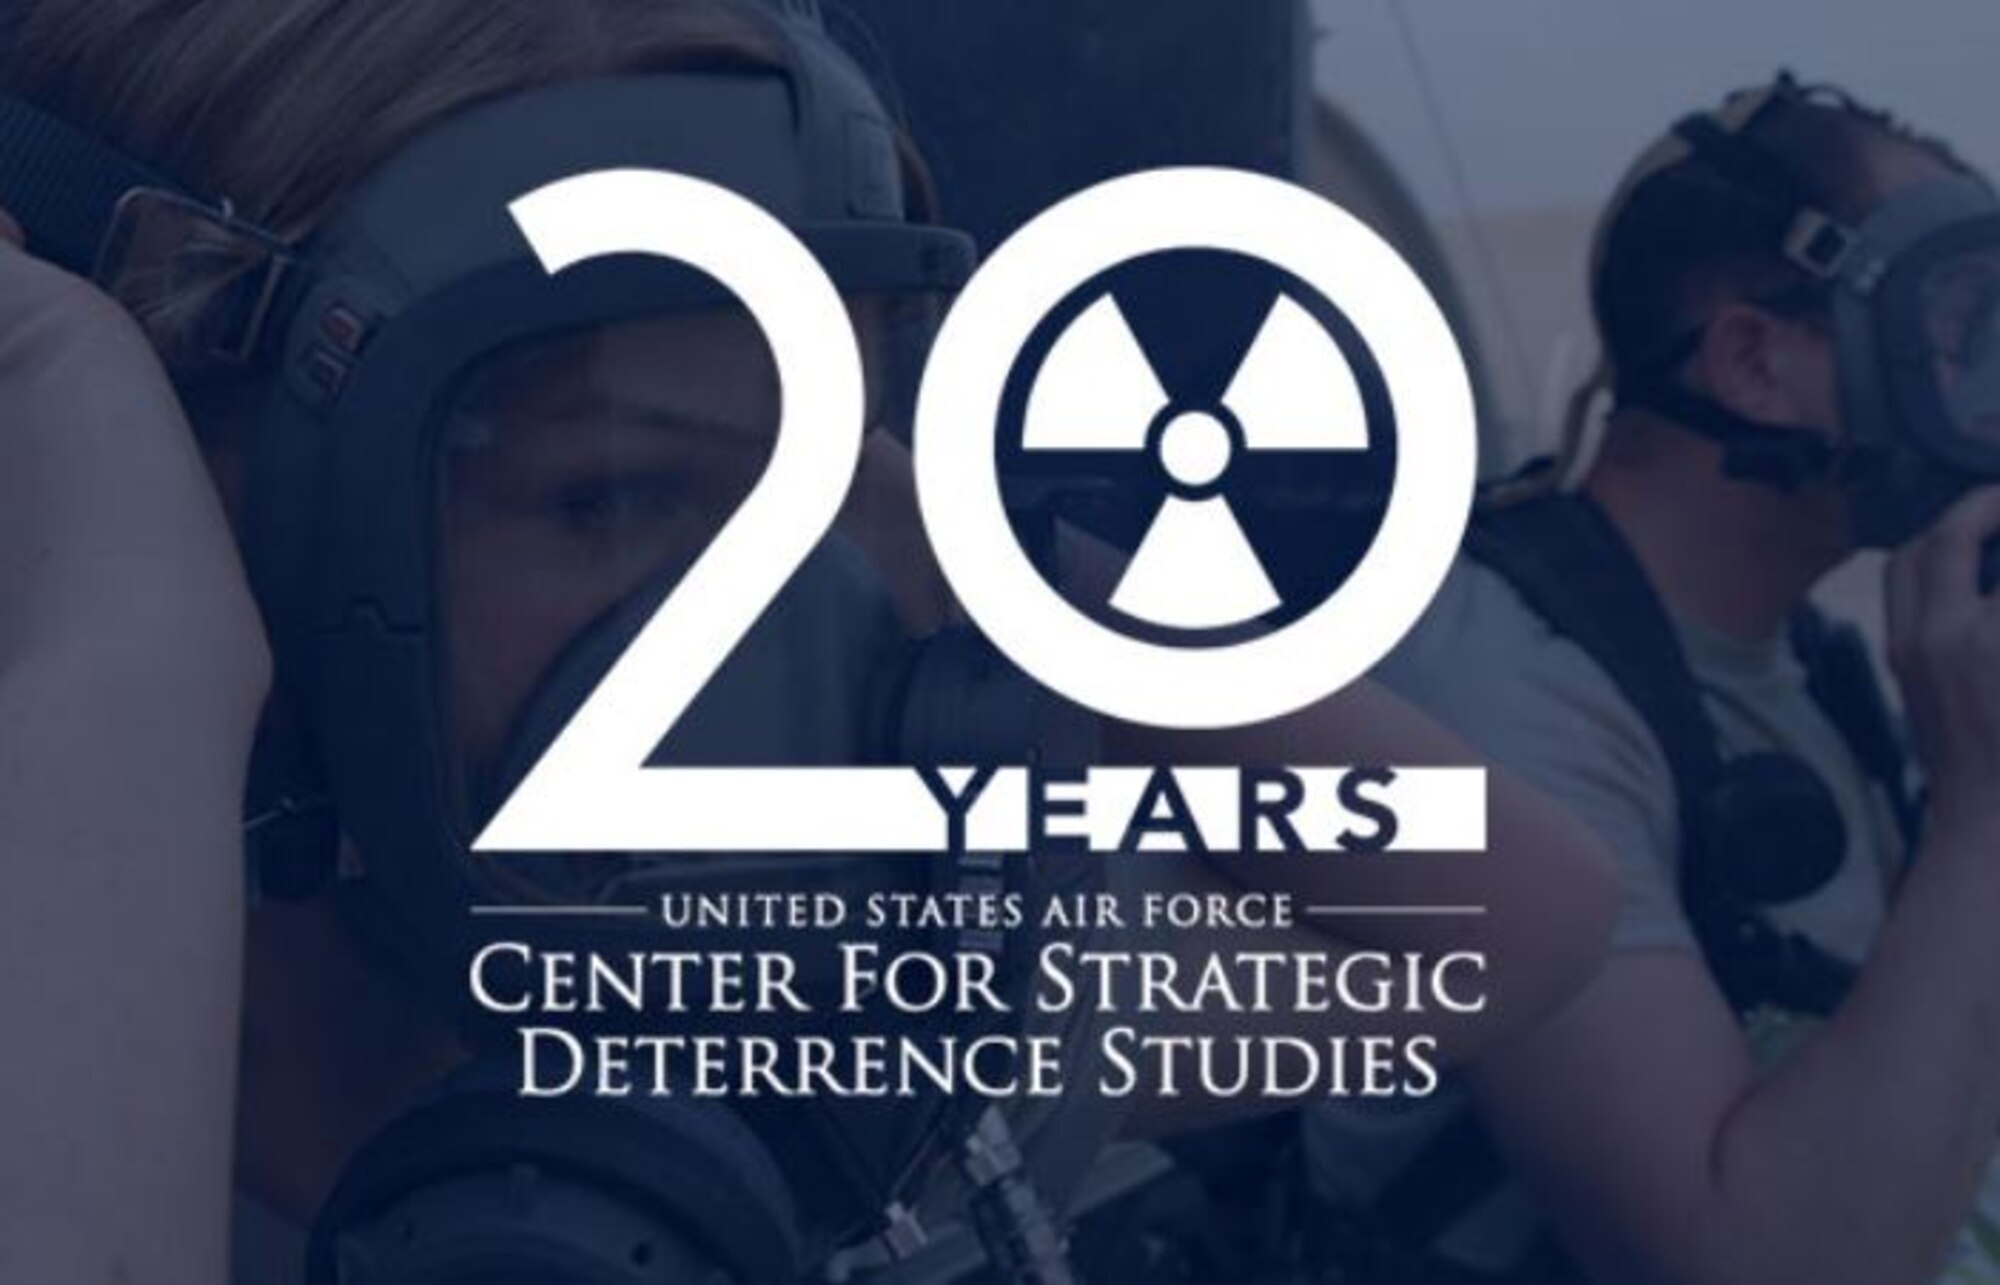 Graphic caption: The Air Force Center for Strategic Deterrence Studies at Air University celebrates its 20th anniversary in September 2018. The center, in collaboration with Global Strike Command, offers a Strategic Deterrence Basic Course for Airmen through online video conferencing. In 1998, the service stood up the then-named Air Force Counterproliferation Center, which was renamed the Air Force Center for Unconventional Weapons Studies in 2014. Recently, the center was renamed the Center for Strategic Deterrence Studies to reflect the importance of maintaining a credible and robust strategic deterrence as one of the Air Force’s enduring contributions to national defense. (Courtesy graphic)